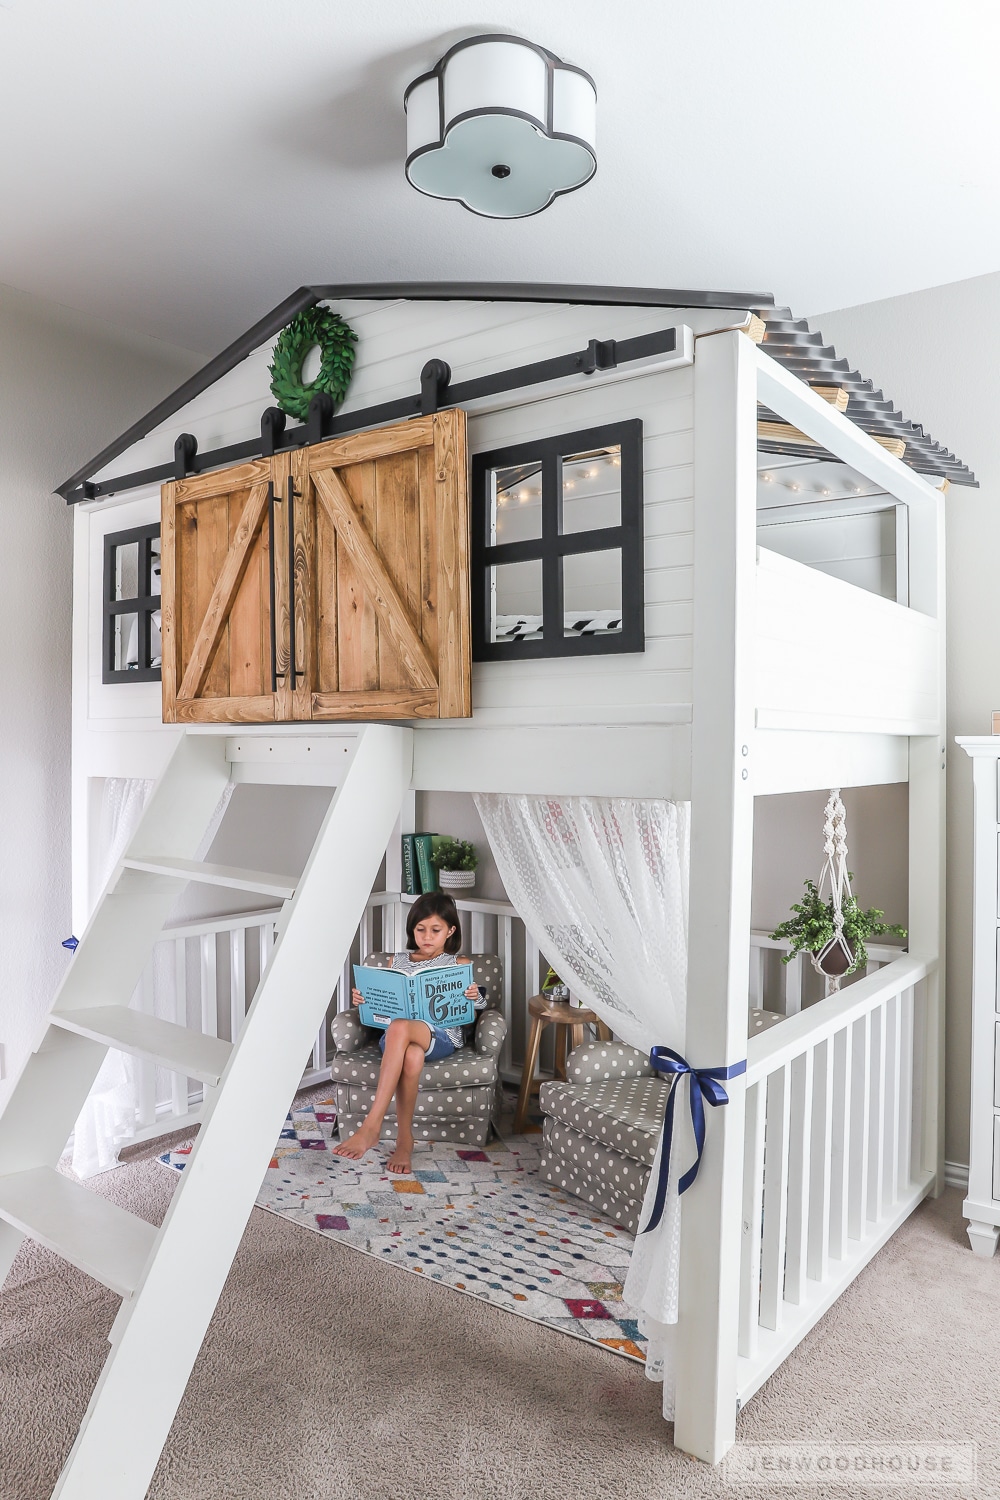 Build A Diy Sliding Barn Door Loft Bed, How To Make Your Own Full Size Loft Bed